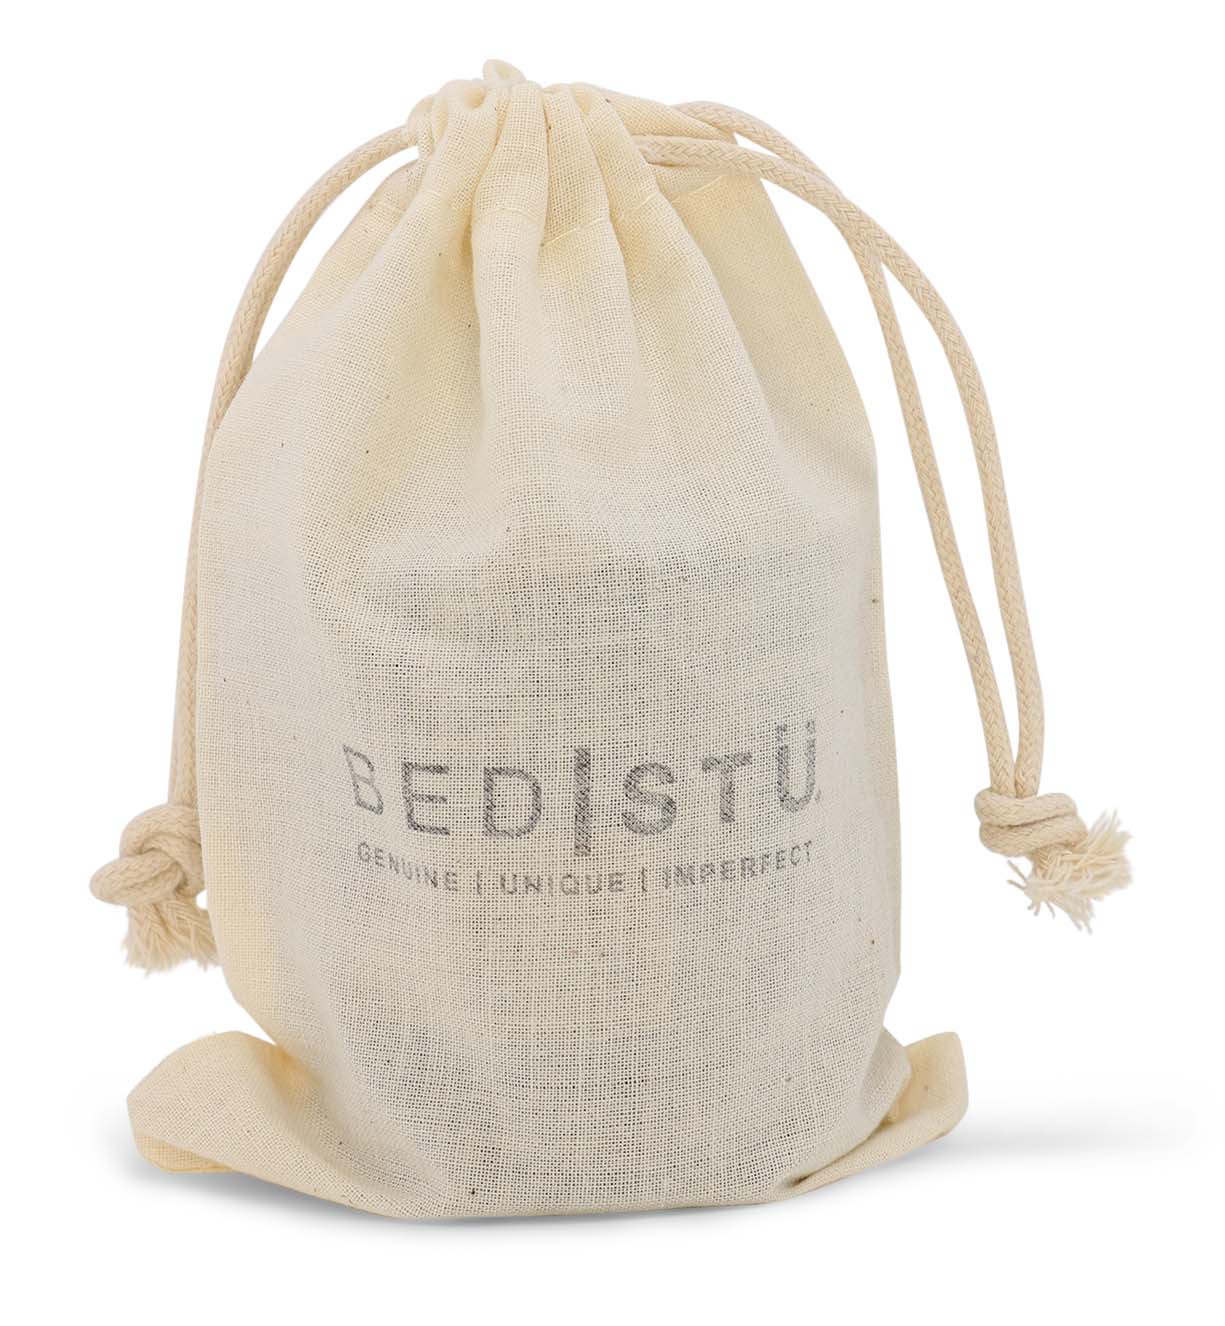 A bag with the brand name Bed Stu on it.